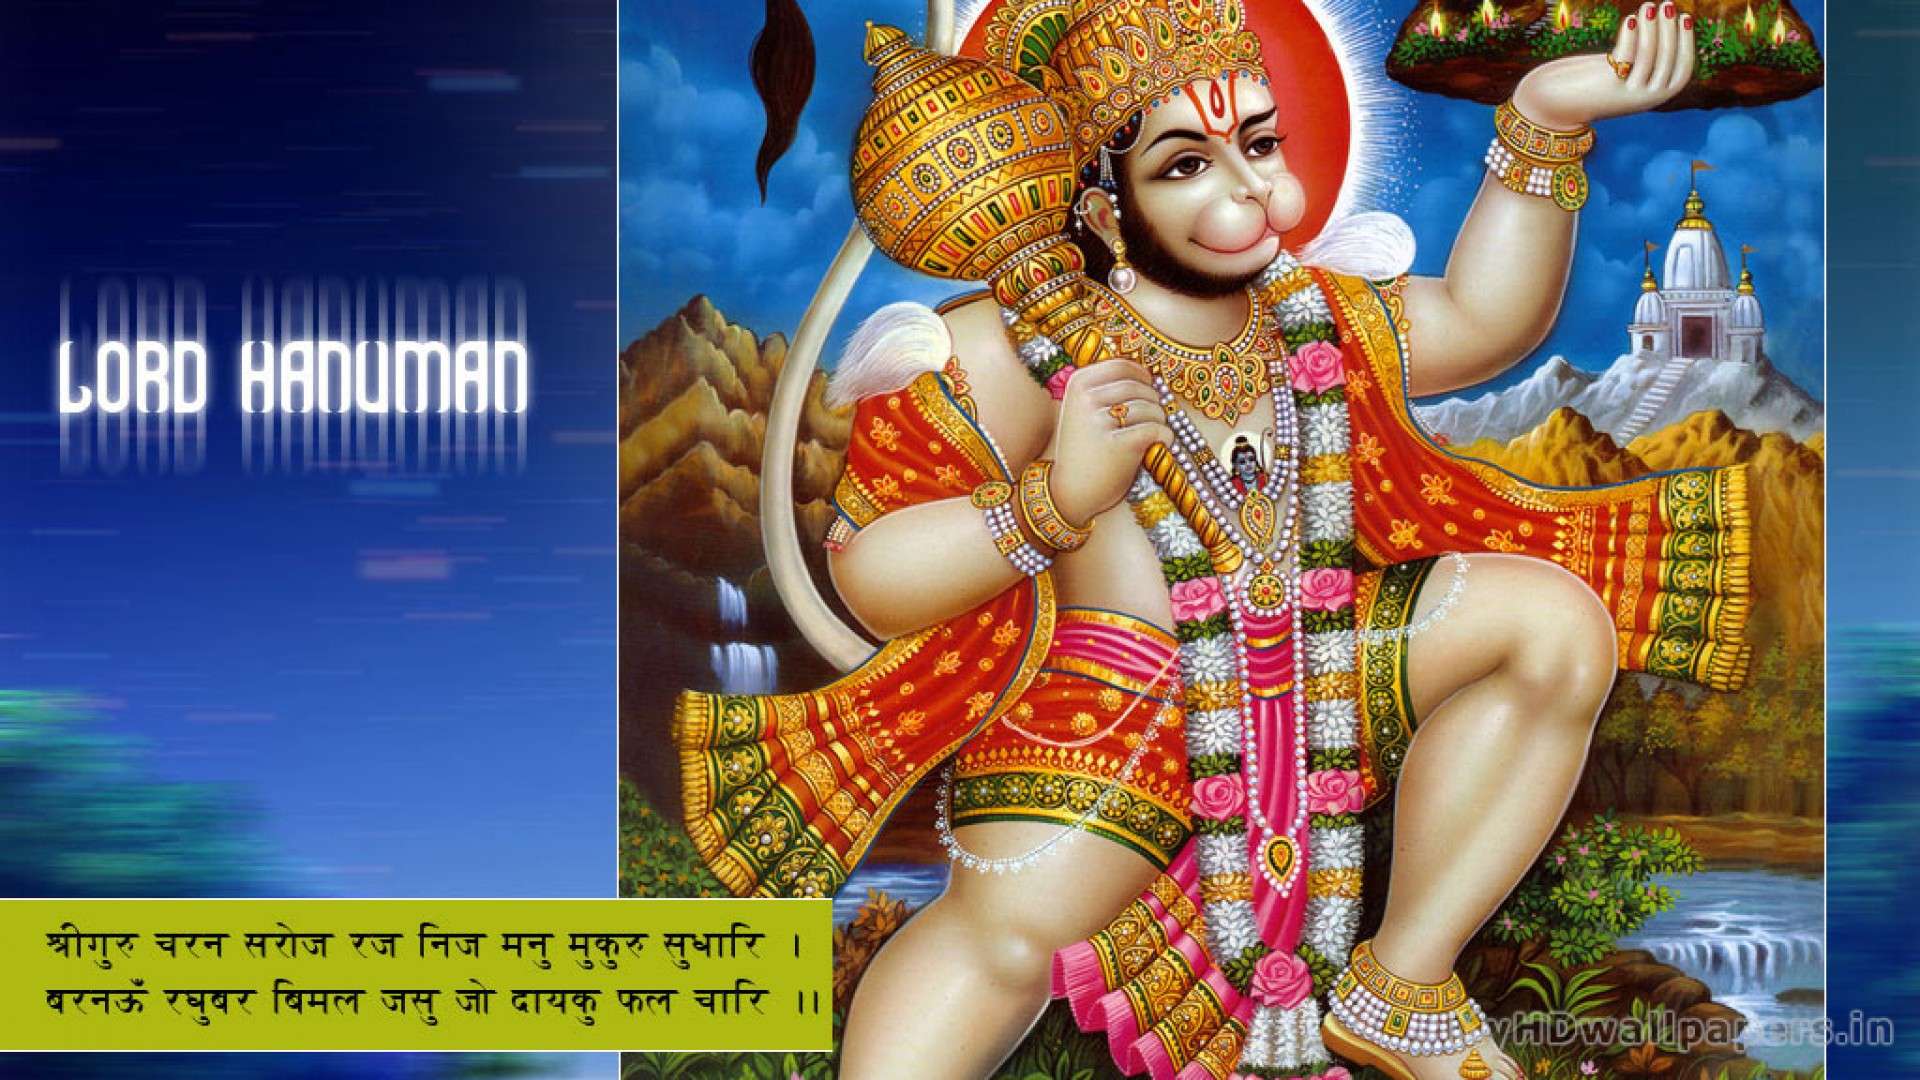 Hanuman Wallpapers Full Size submited images